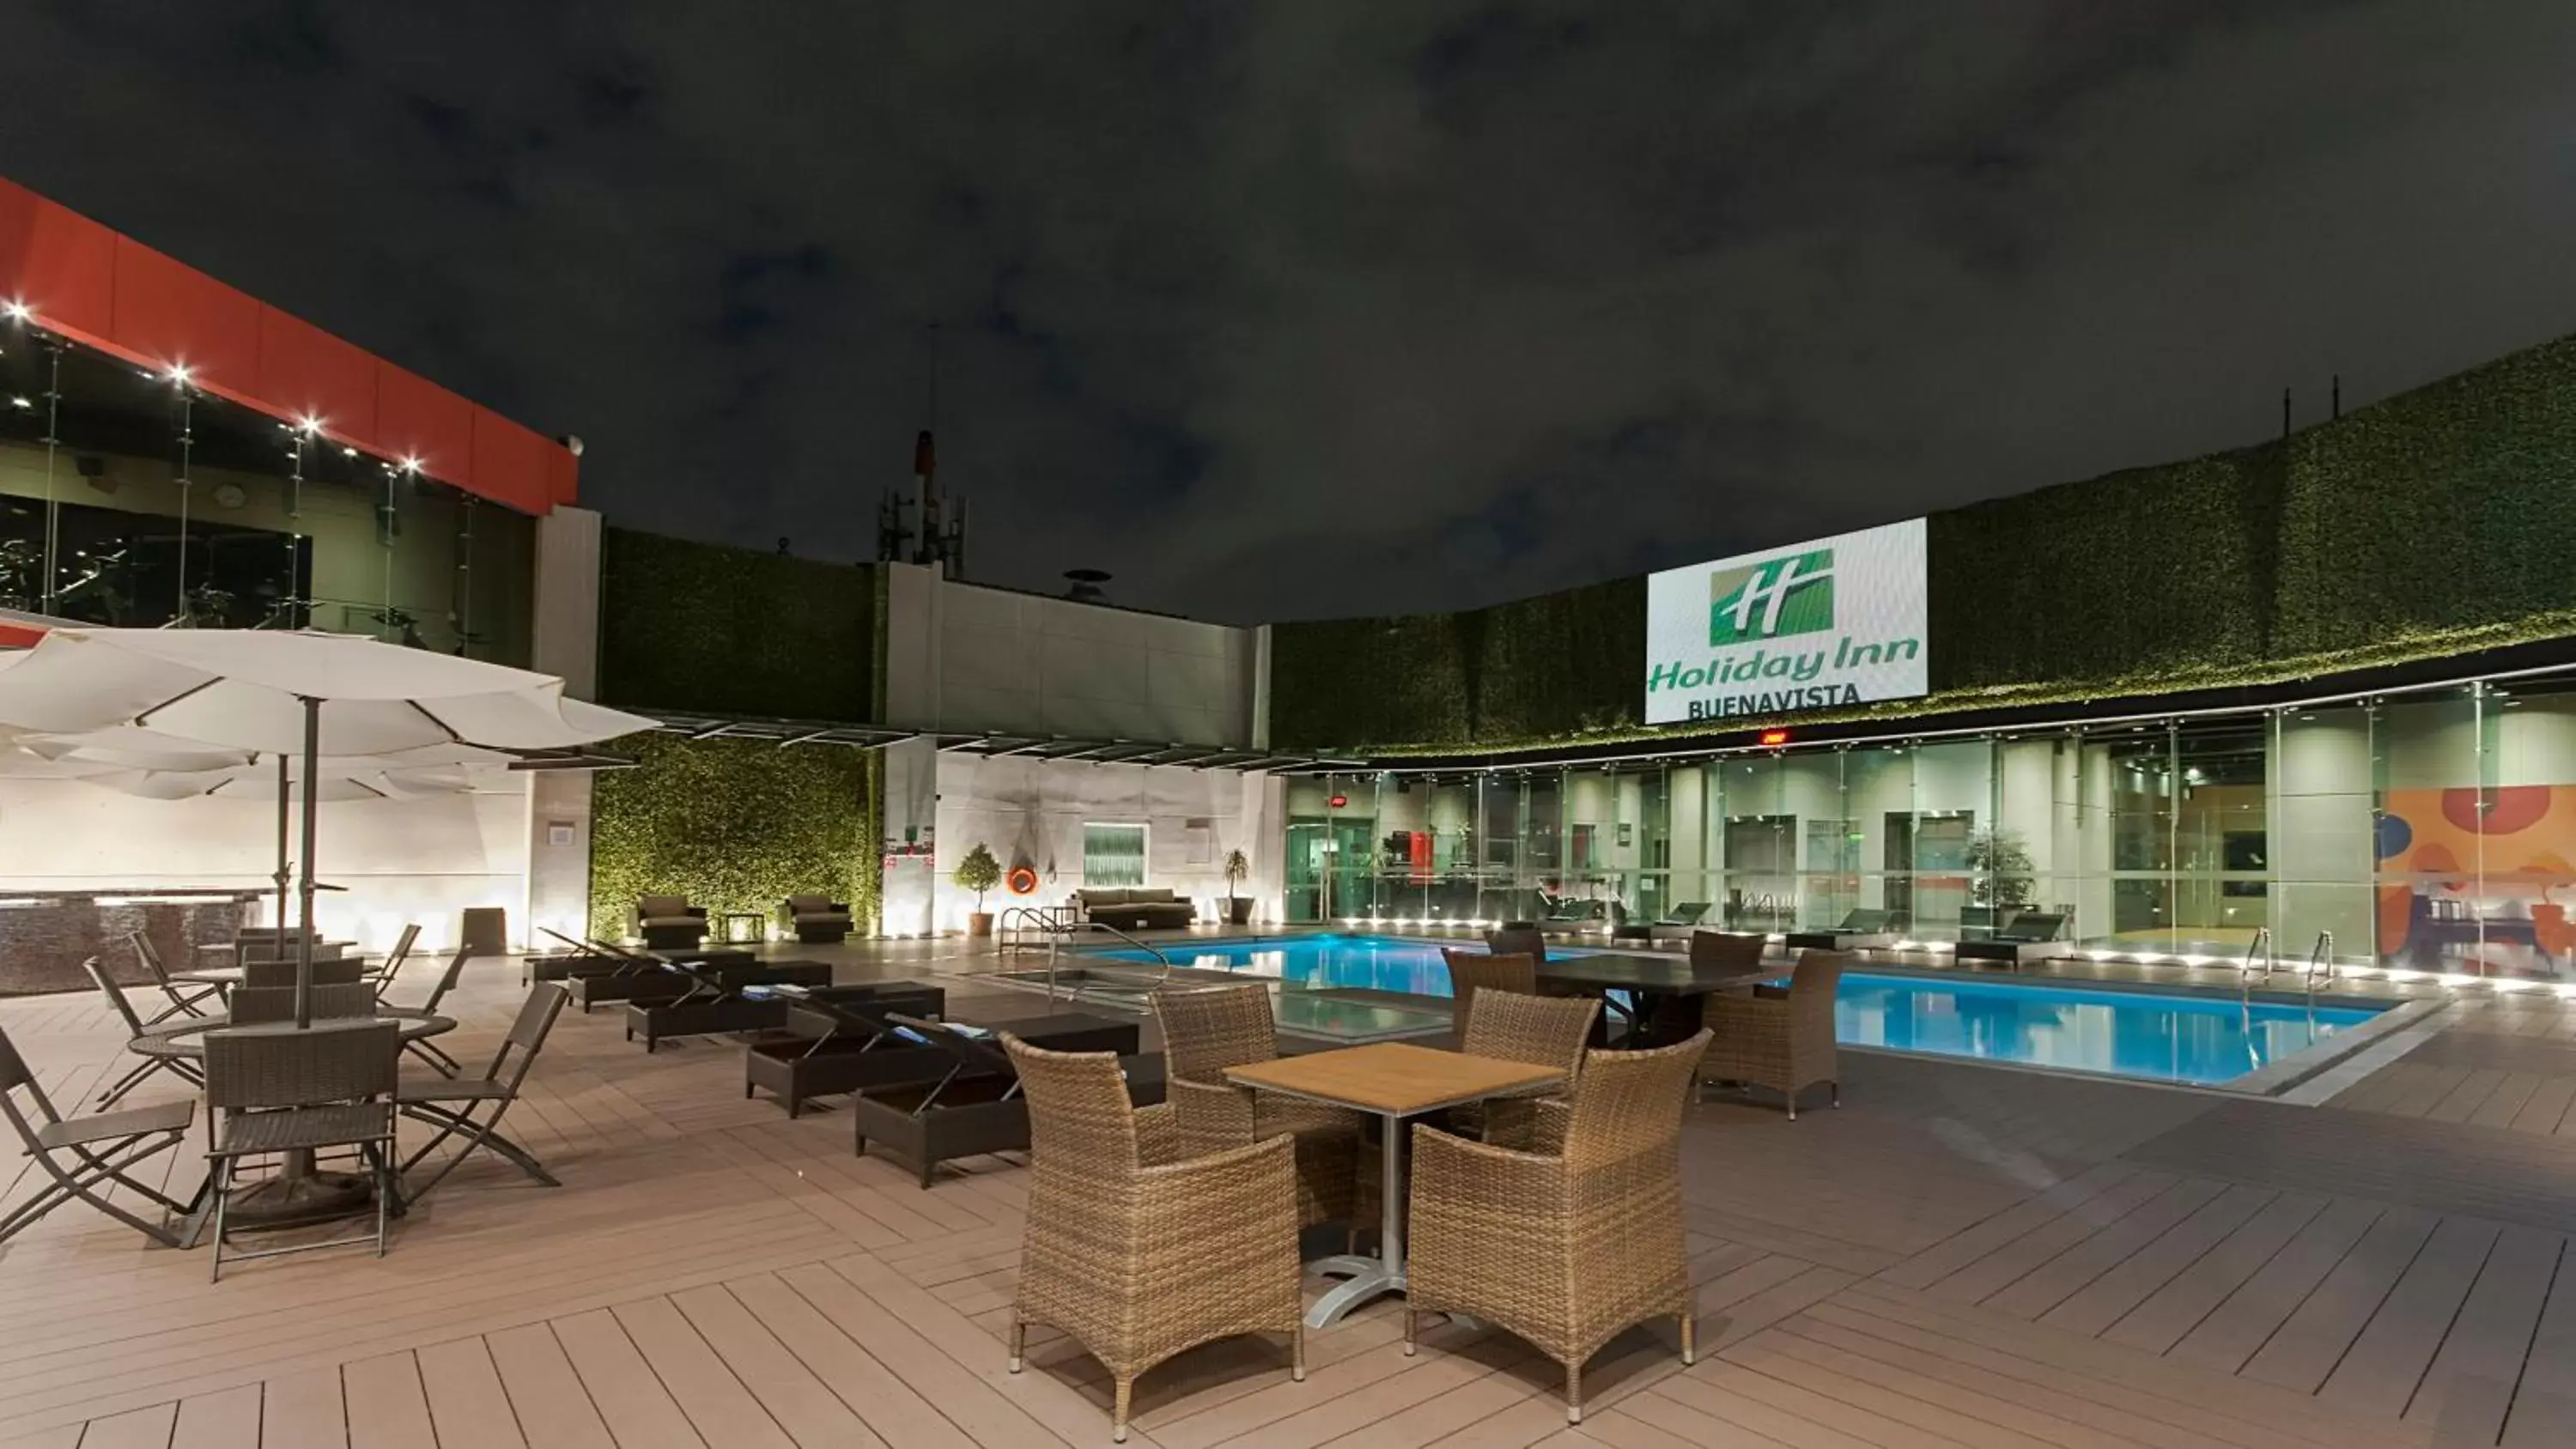 Fitness centre/facilities, Restaurant/Places to Eat in Holiday Inn Buenavista, an IHG Hotel